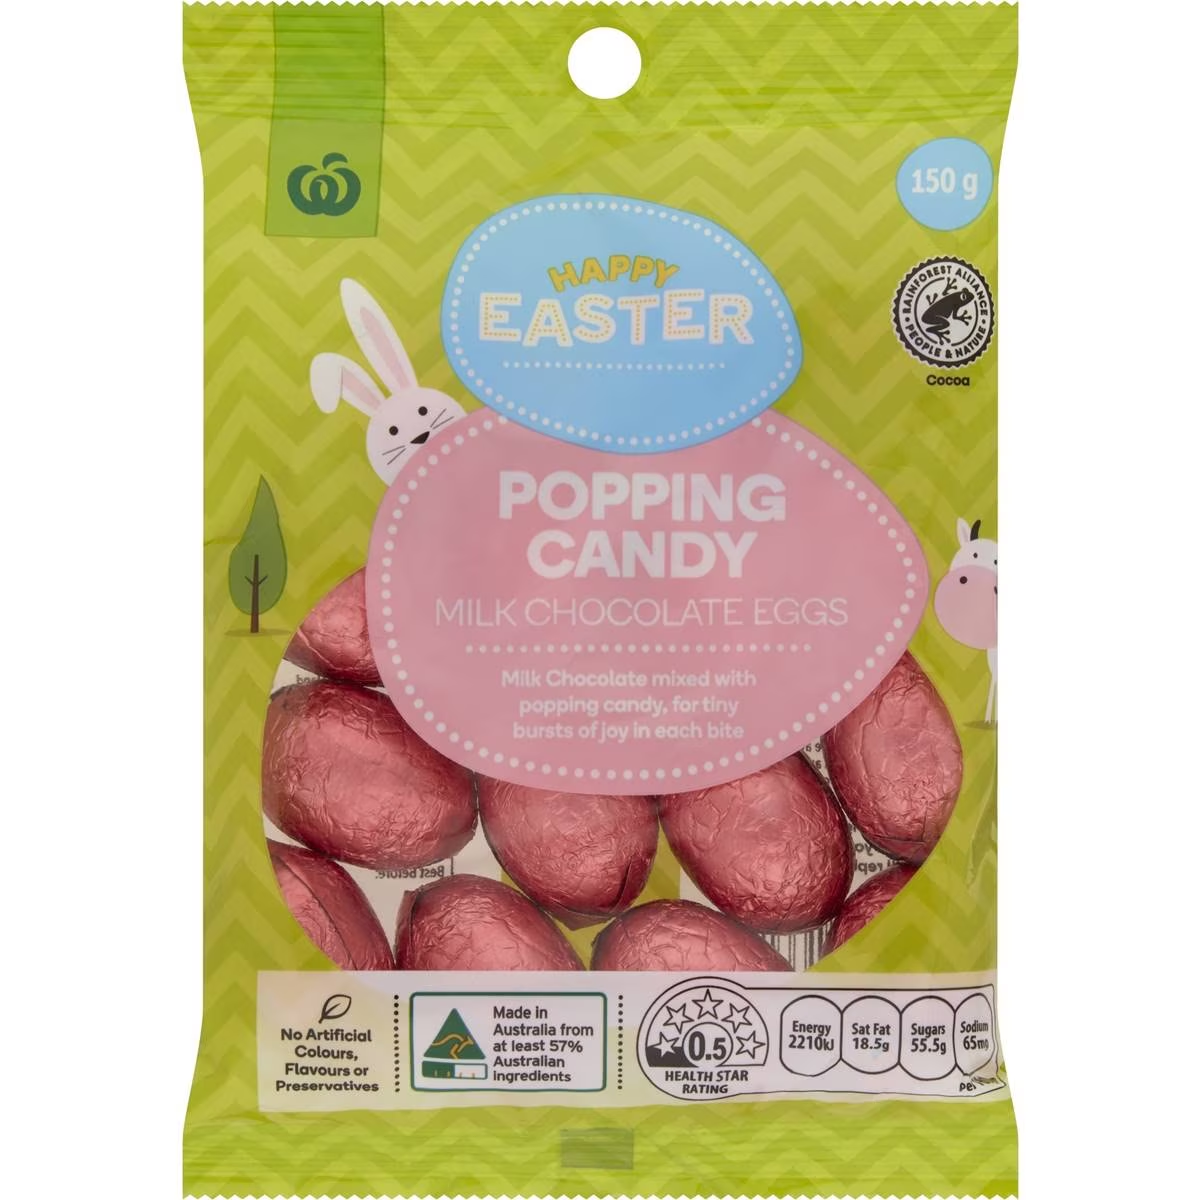 Woolworths Popping Candy Milk Chocolate Easter Eggs 150g